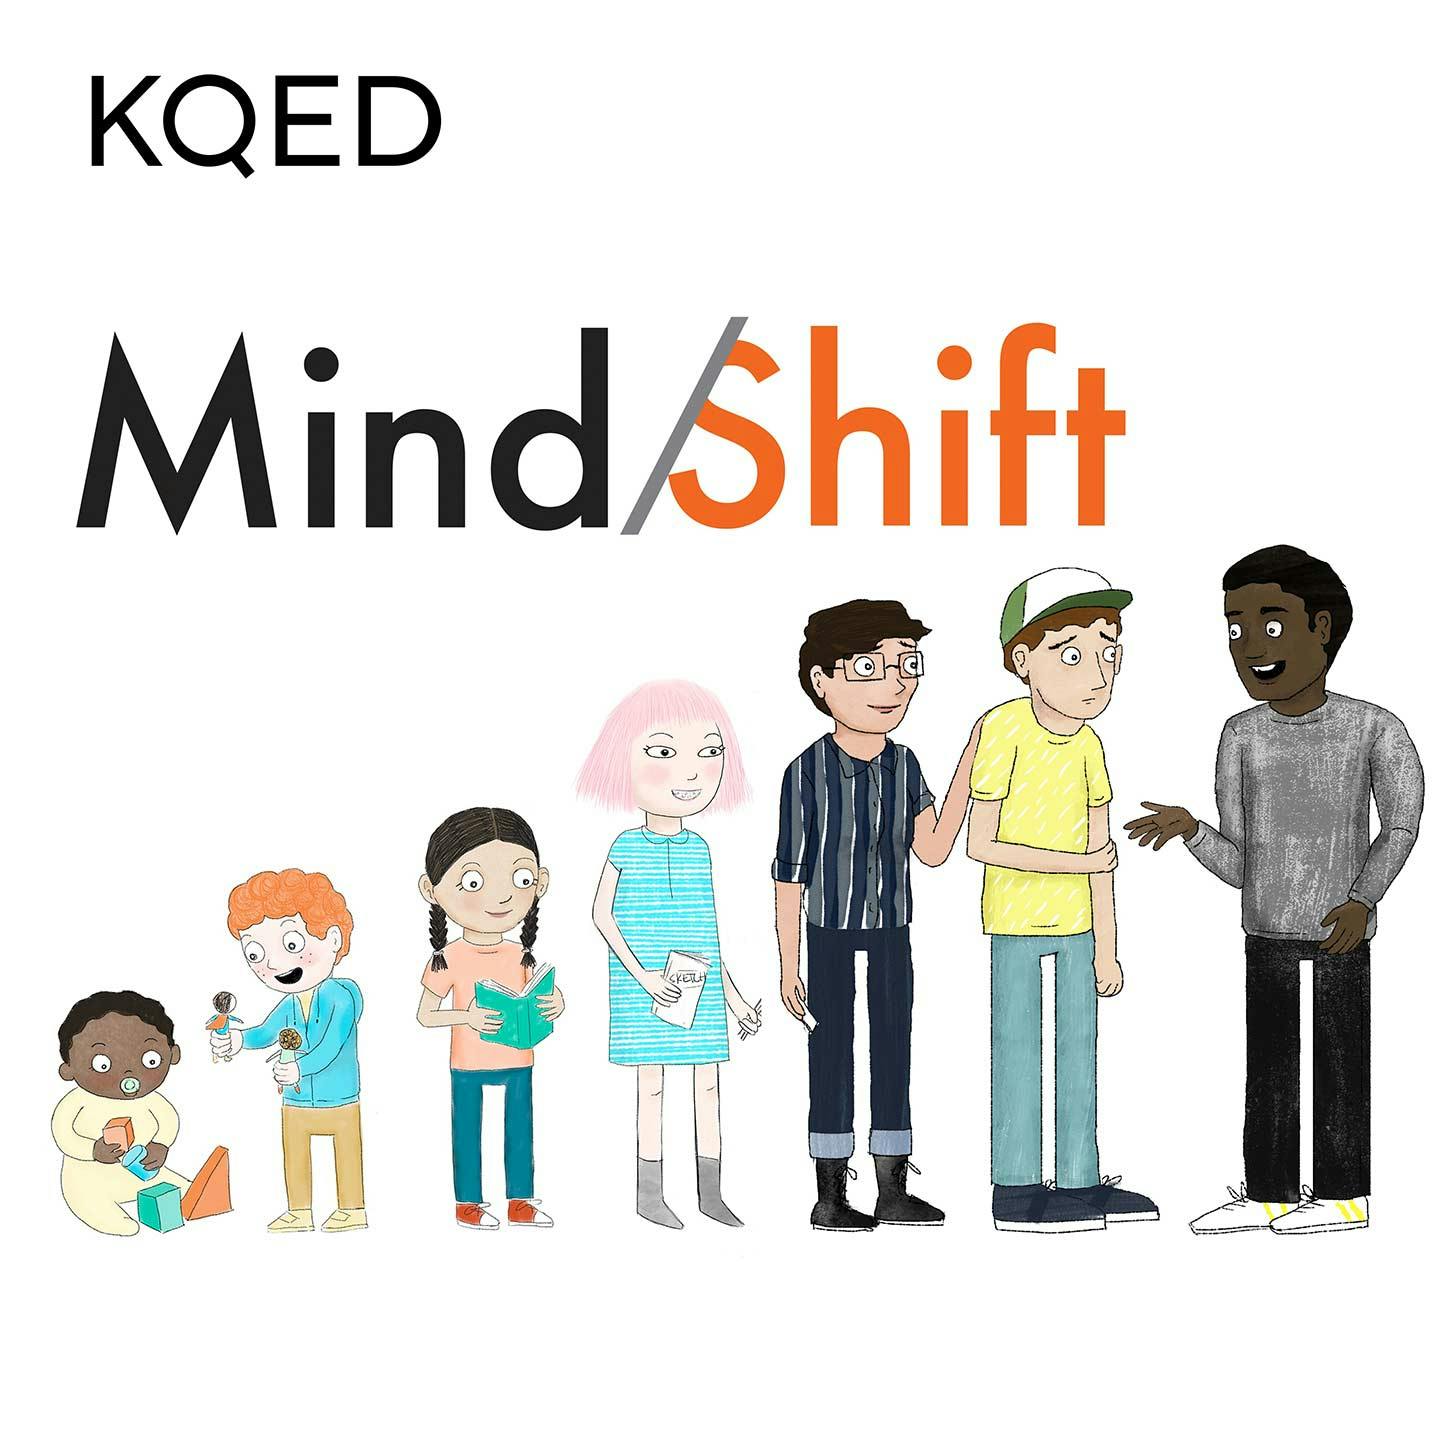 MindShift Podcast Season 3 is Coming Soon!